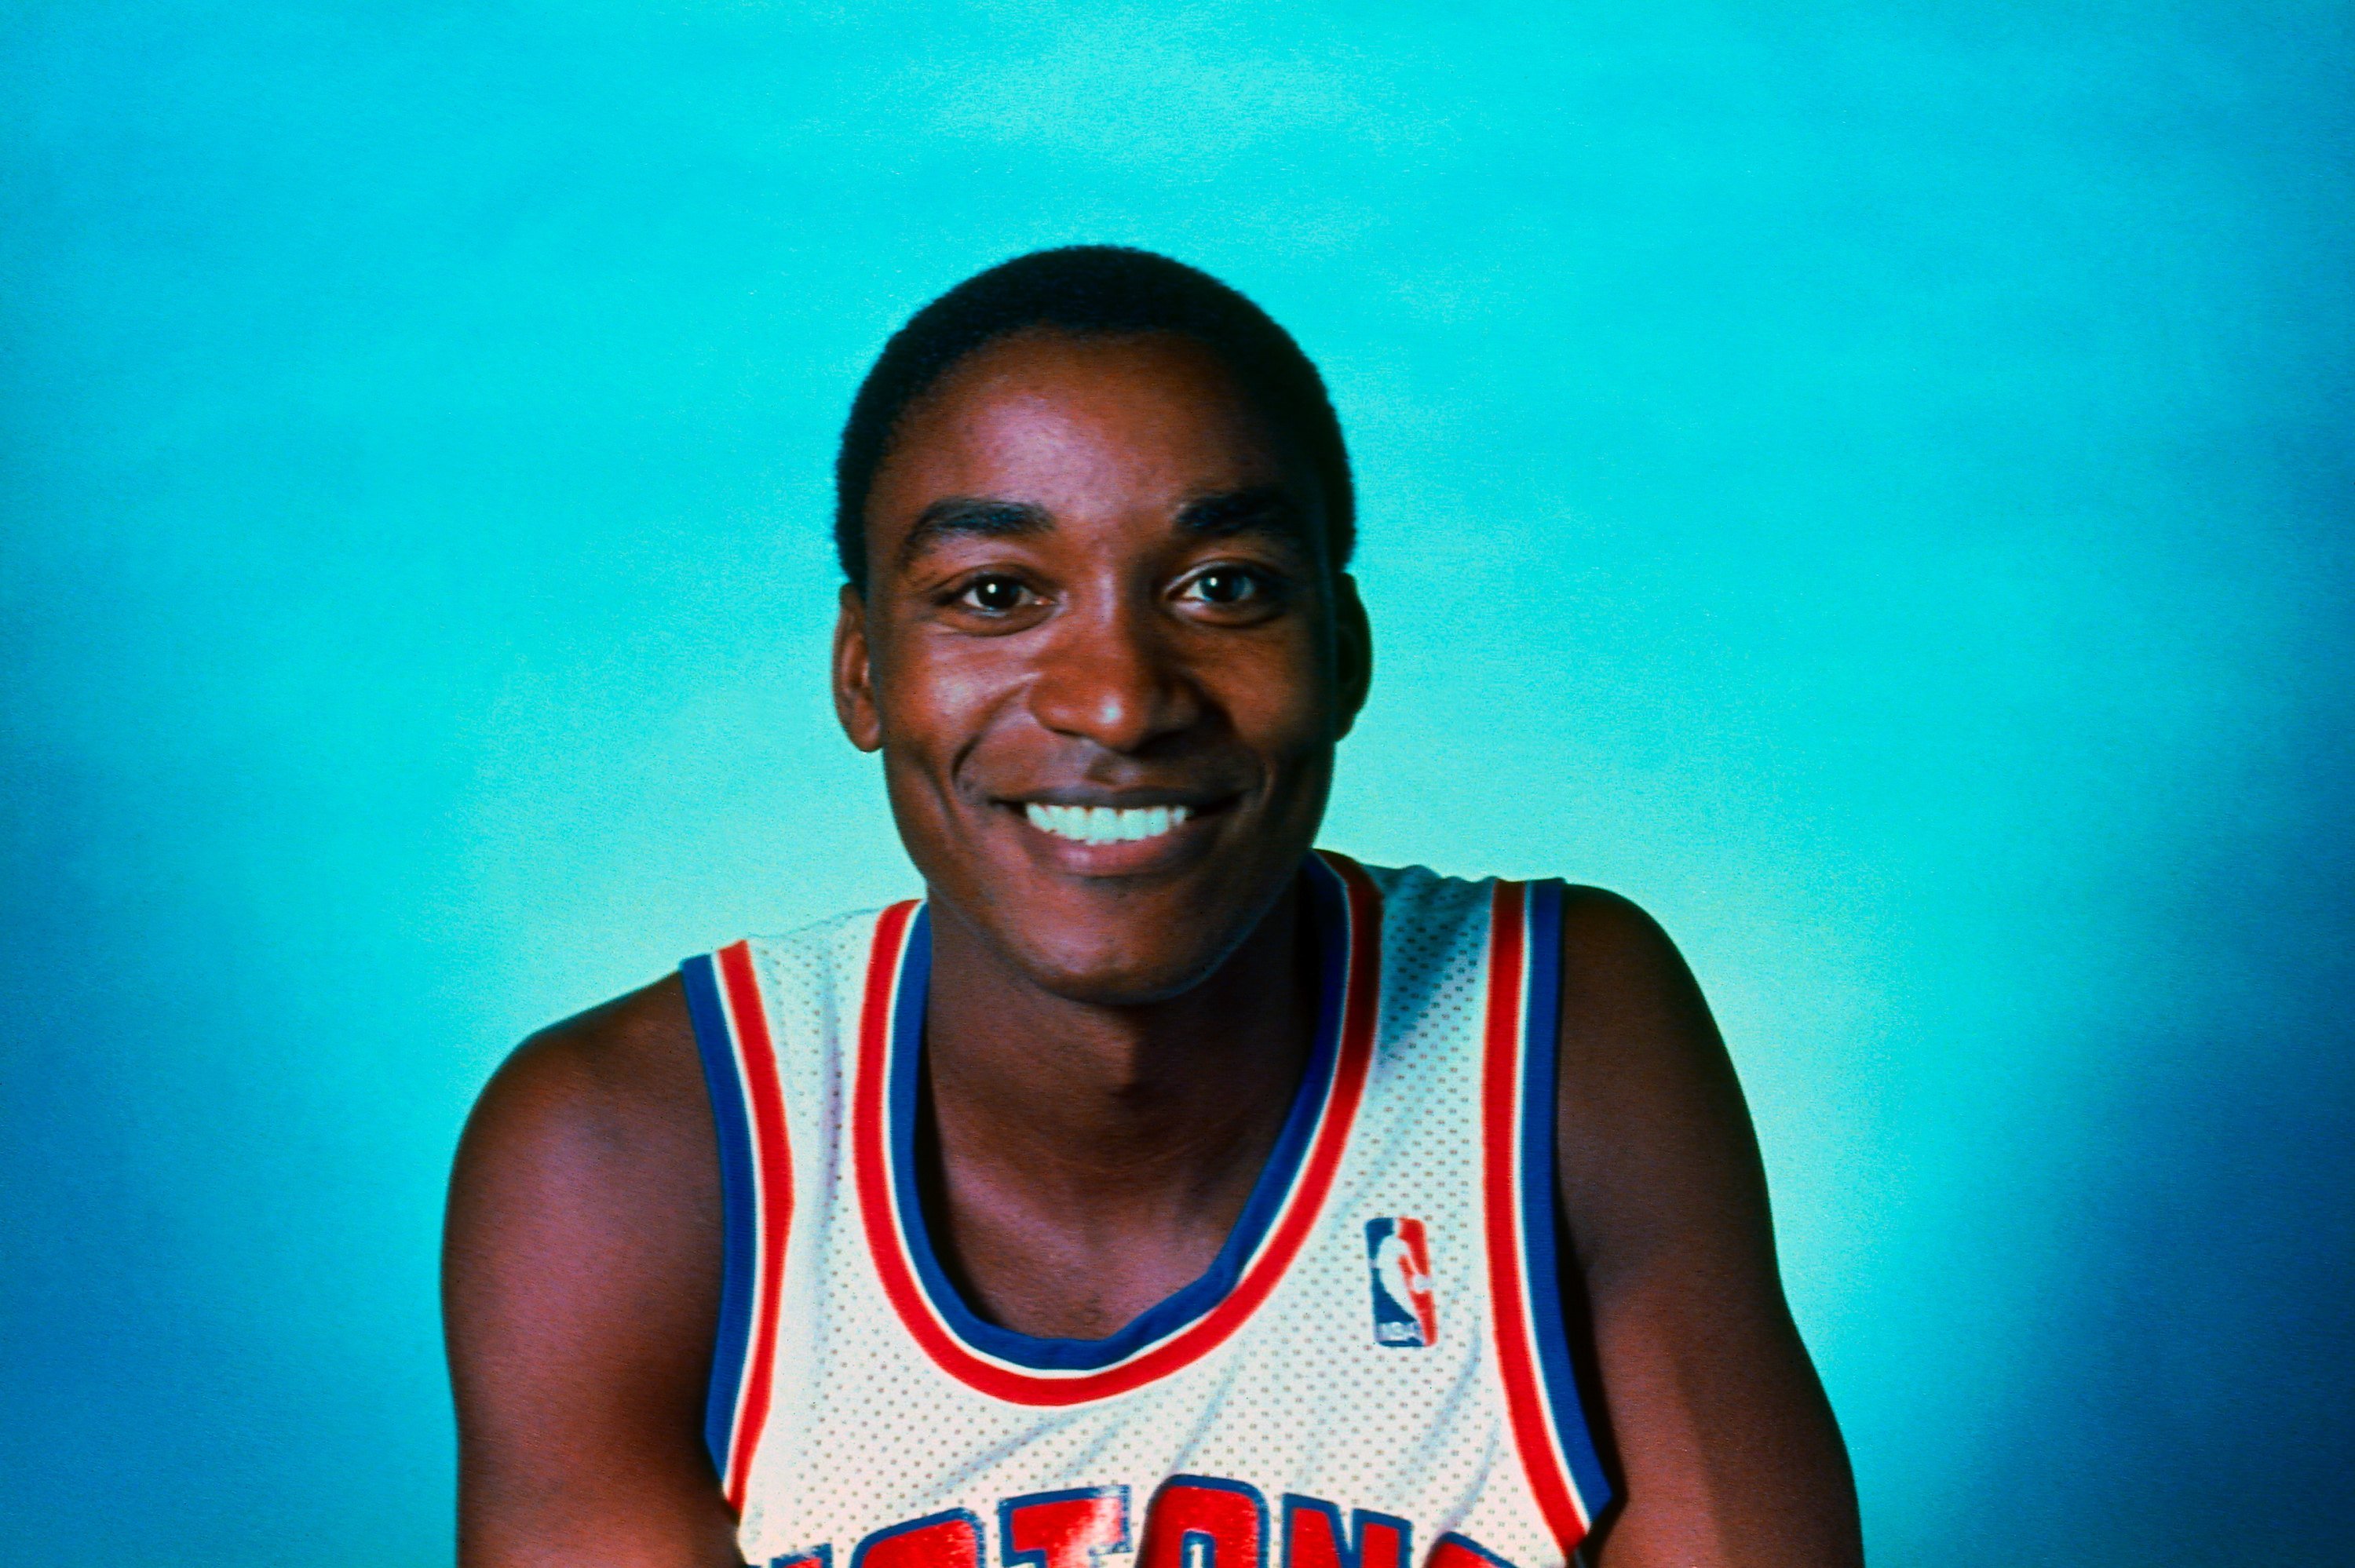 NBA legend Isiah Thomas in a 1987 portrait at the Pontiac Silverdome in Michigan. | Photo: Getty Images